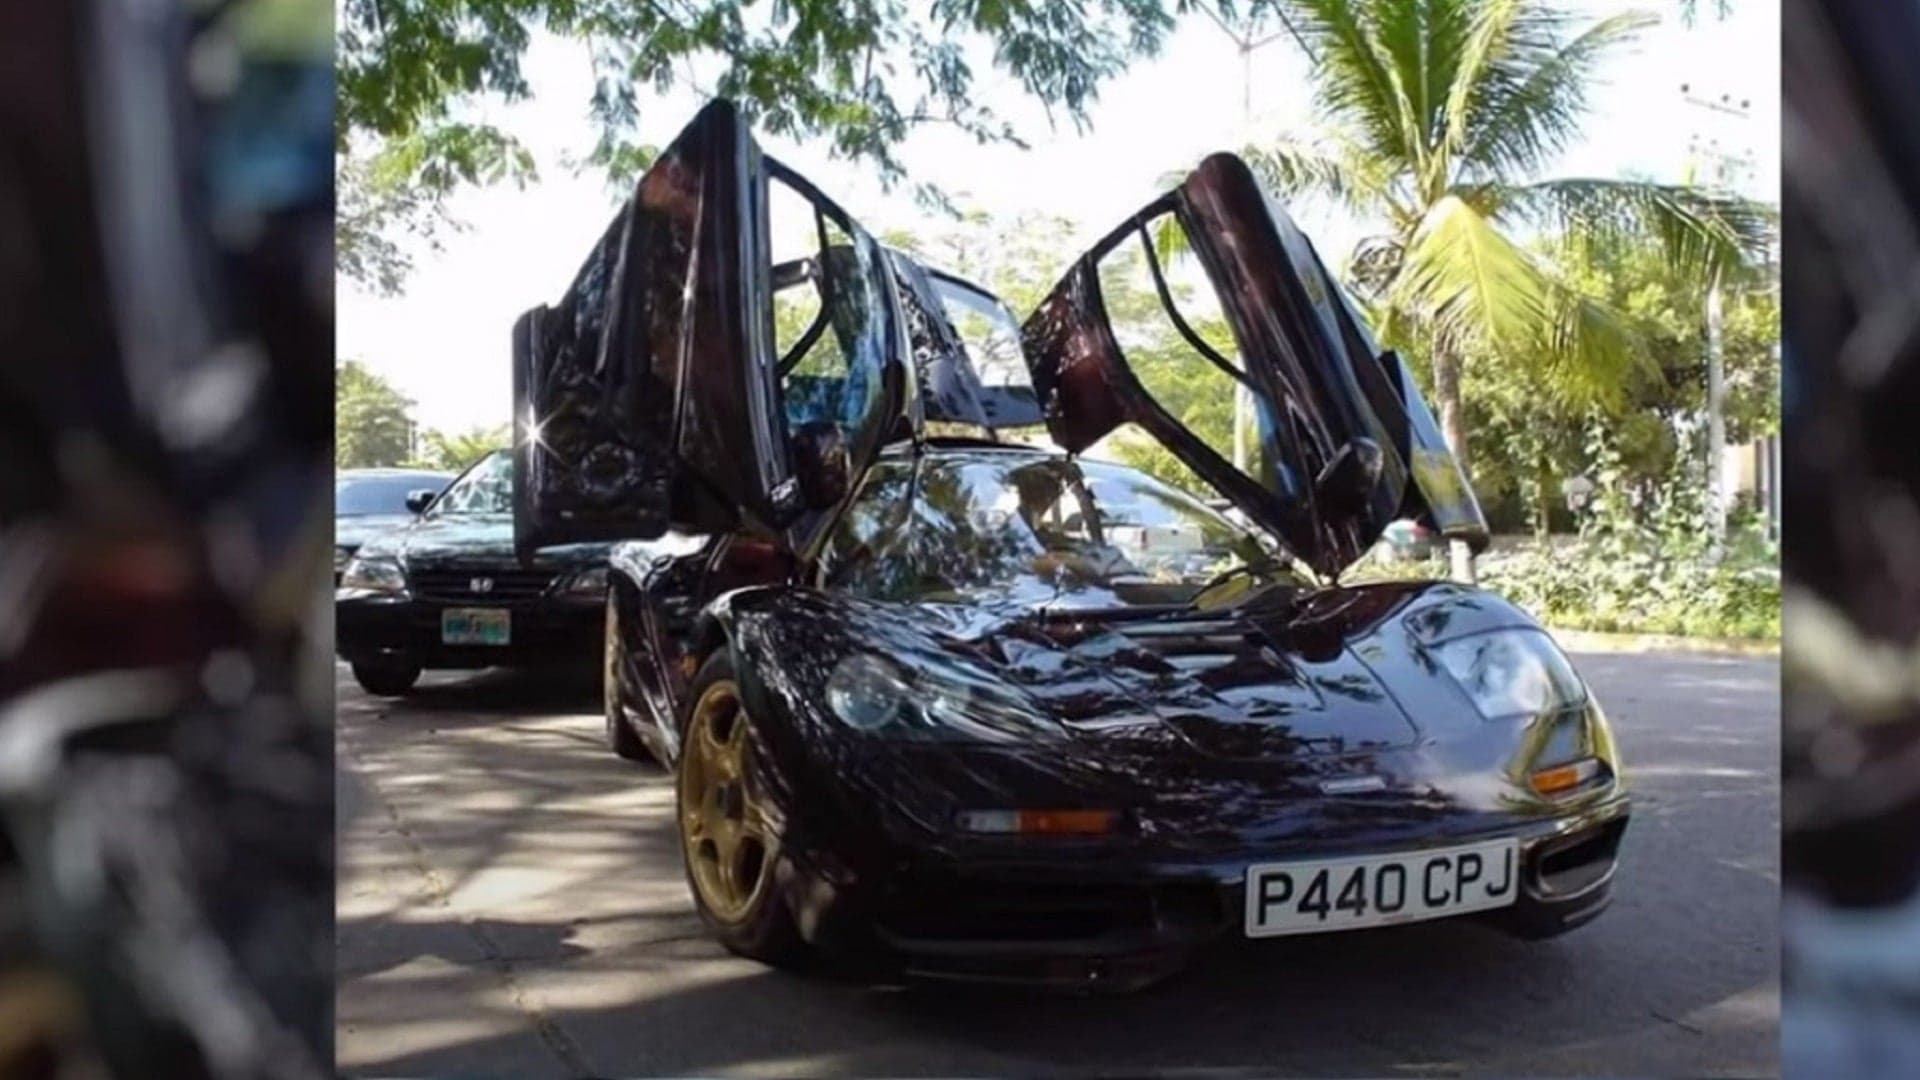 The Mystery of Missing McLaren F1 VIN 039 Points Back to El Chapo’s Drug Cartel